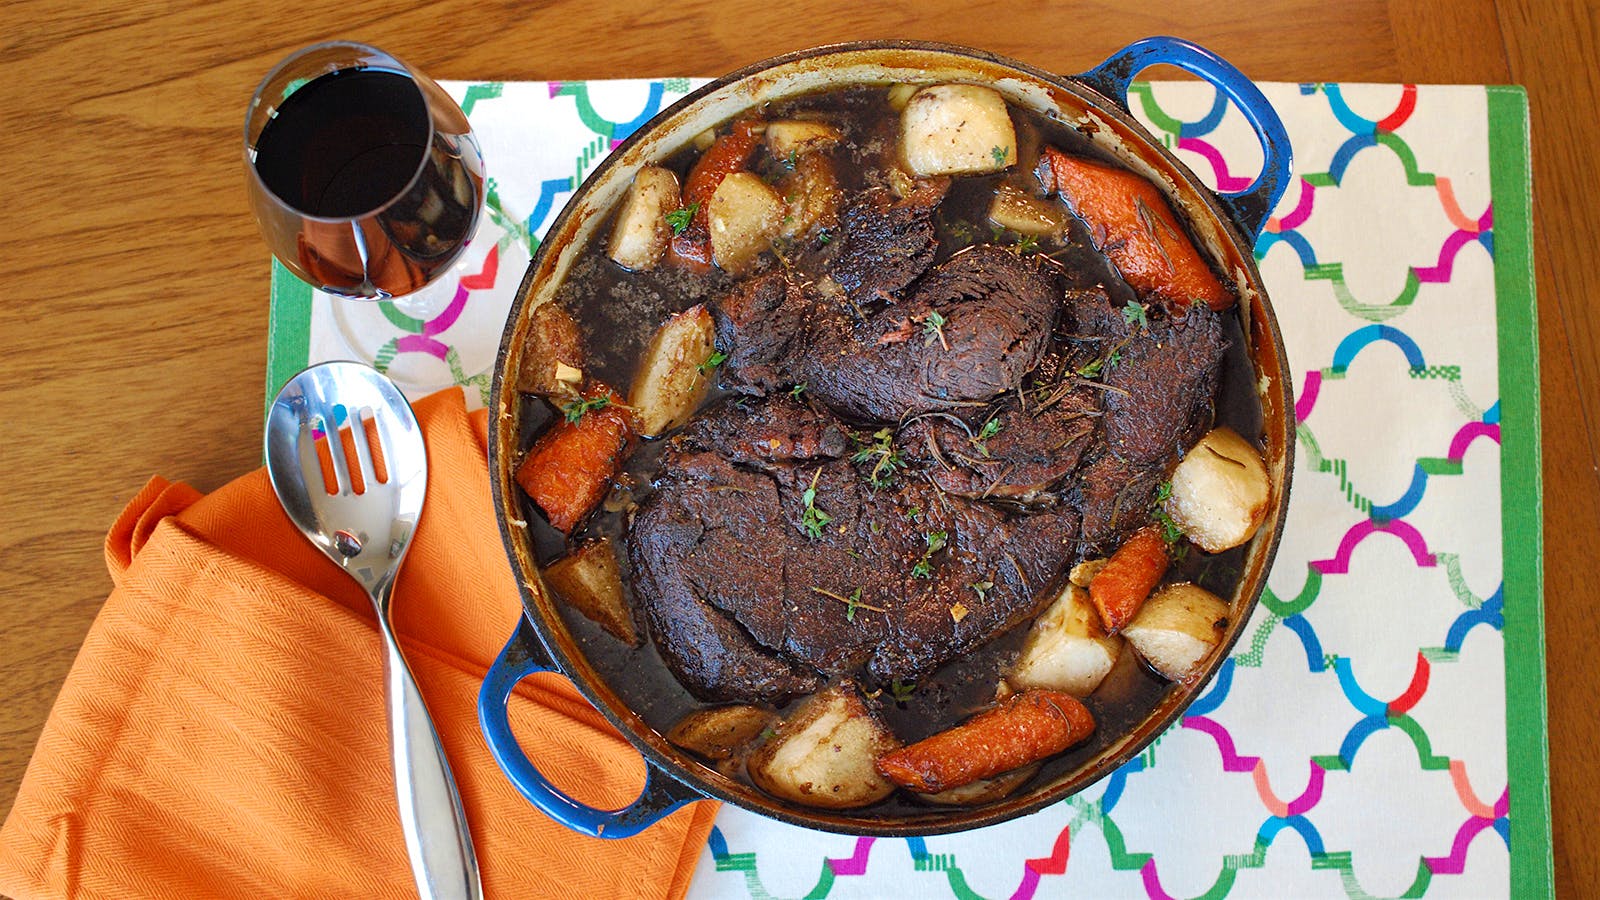 Pot roast can match up with many medium- and full-bodied red wines, but one with refreshing acidity keeps the meal from being overly rich. Photo by Greg Hudson